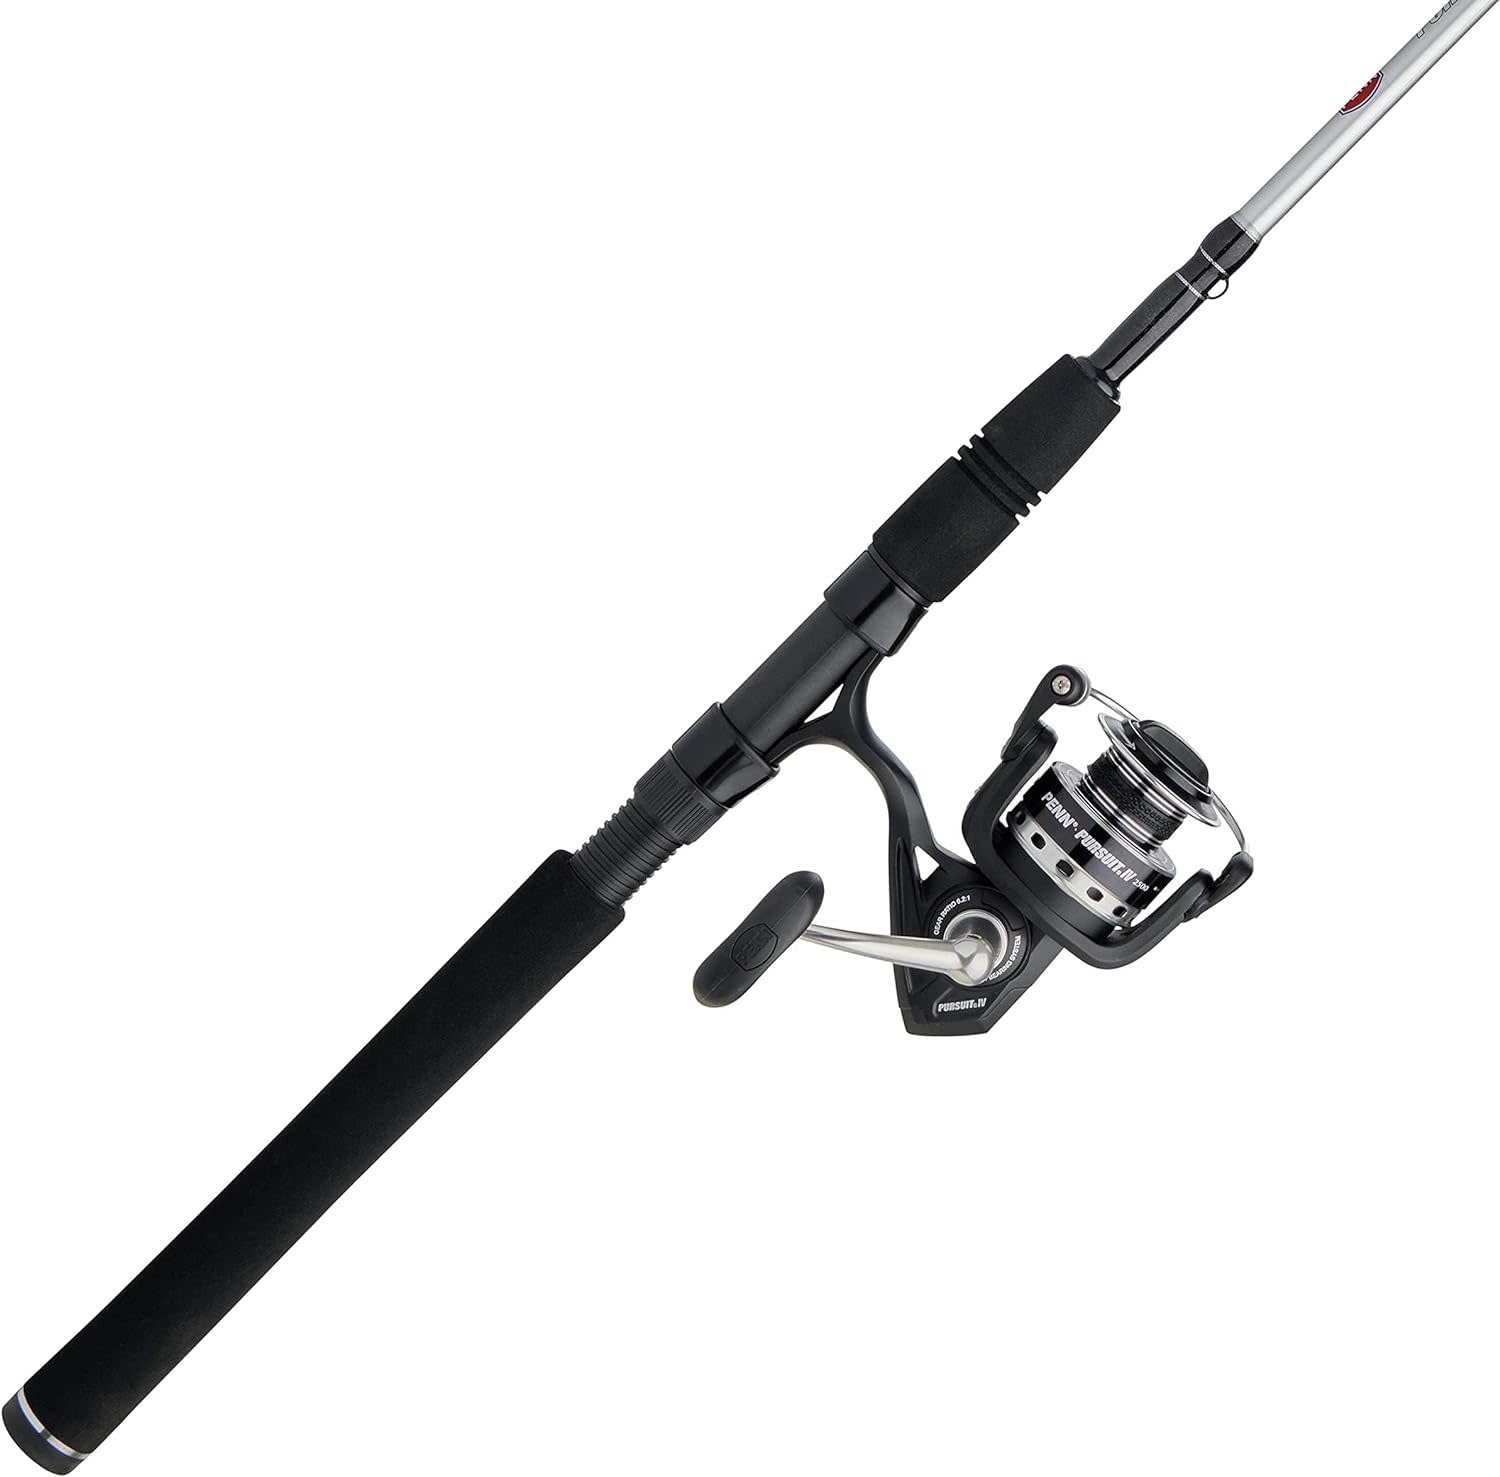 PENN 7' Pursuit IV 2-Piece Fishing Rod and Reel (Size 4000